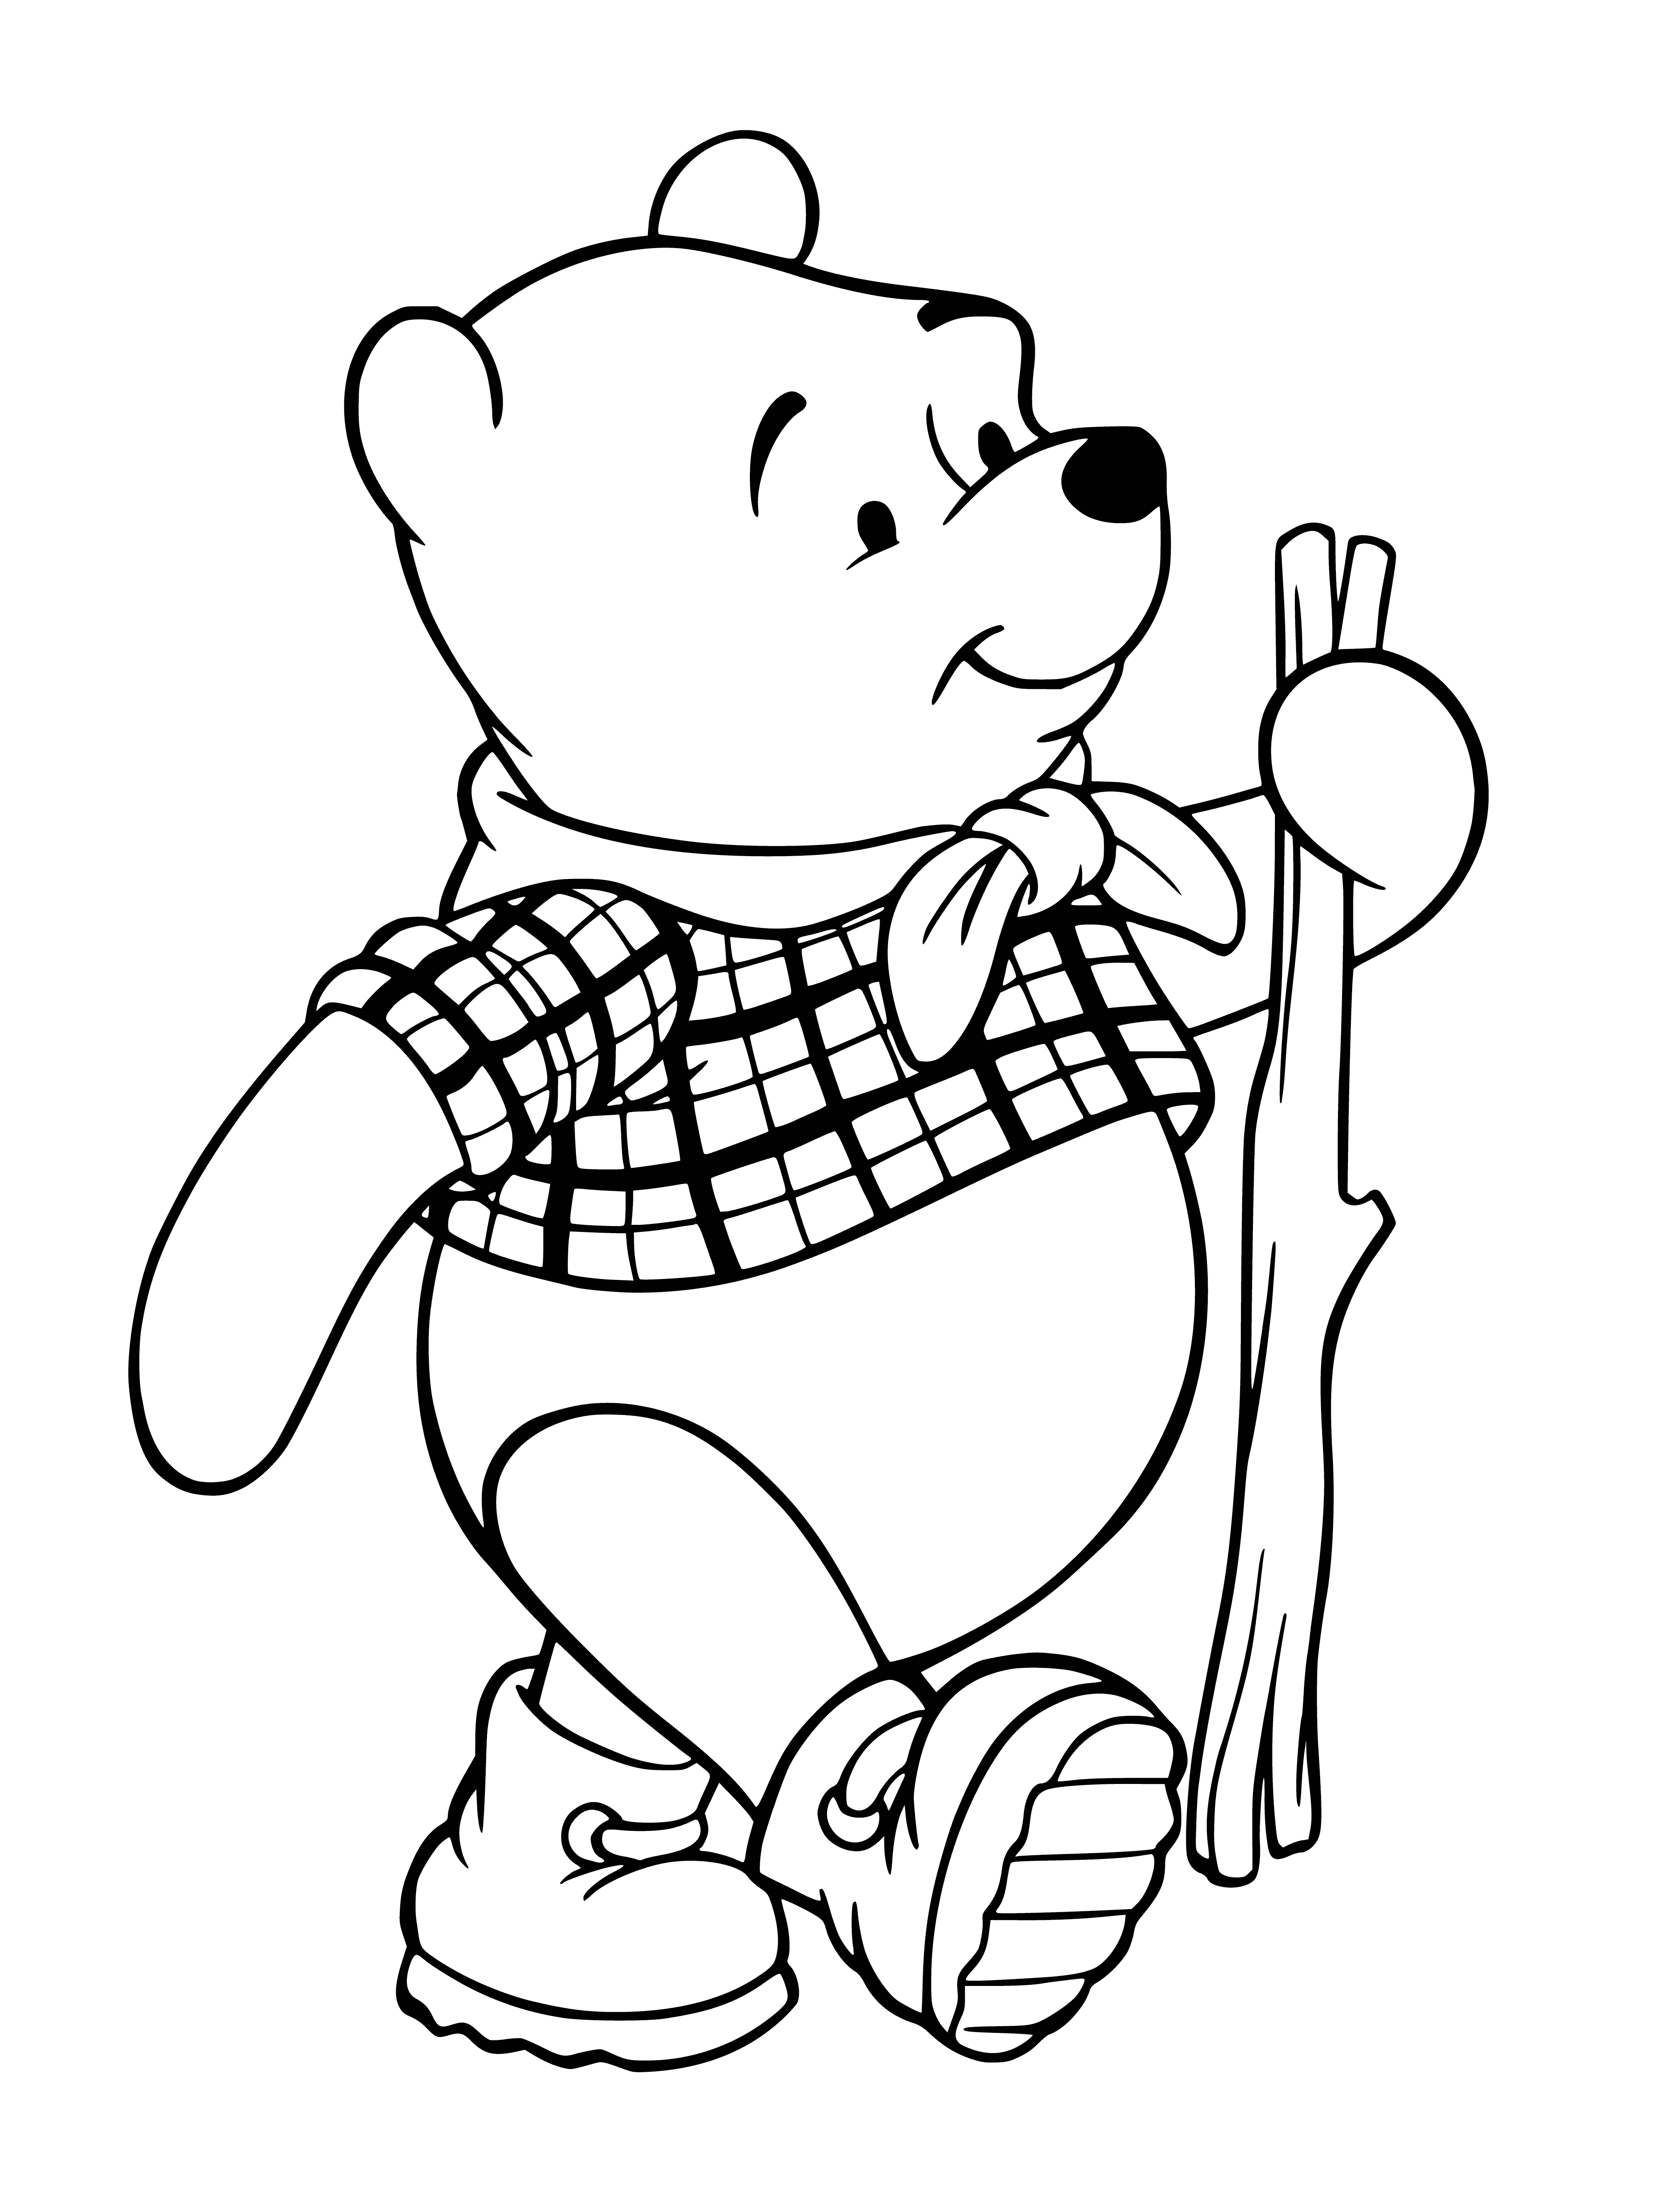 coloring page: Winnie the Pooh travels down a path in a wagon pulled by a donkey through a grassy field with trees and a hill in the distance, with a blue sky and some clouds.